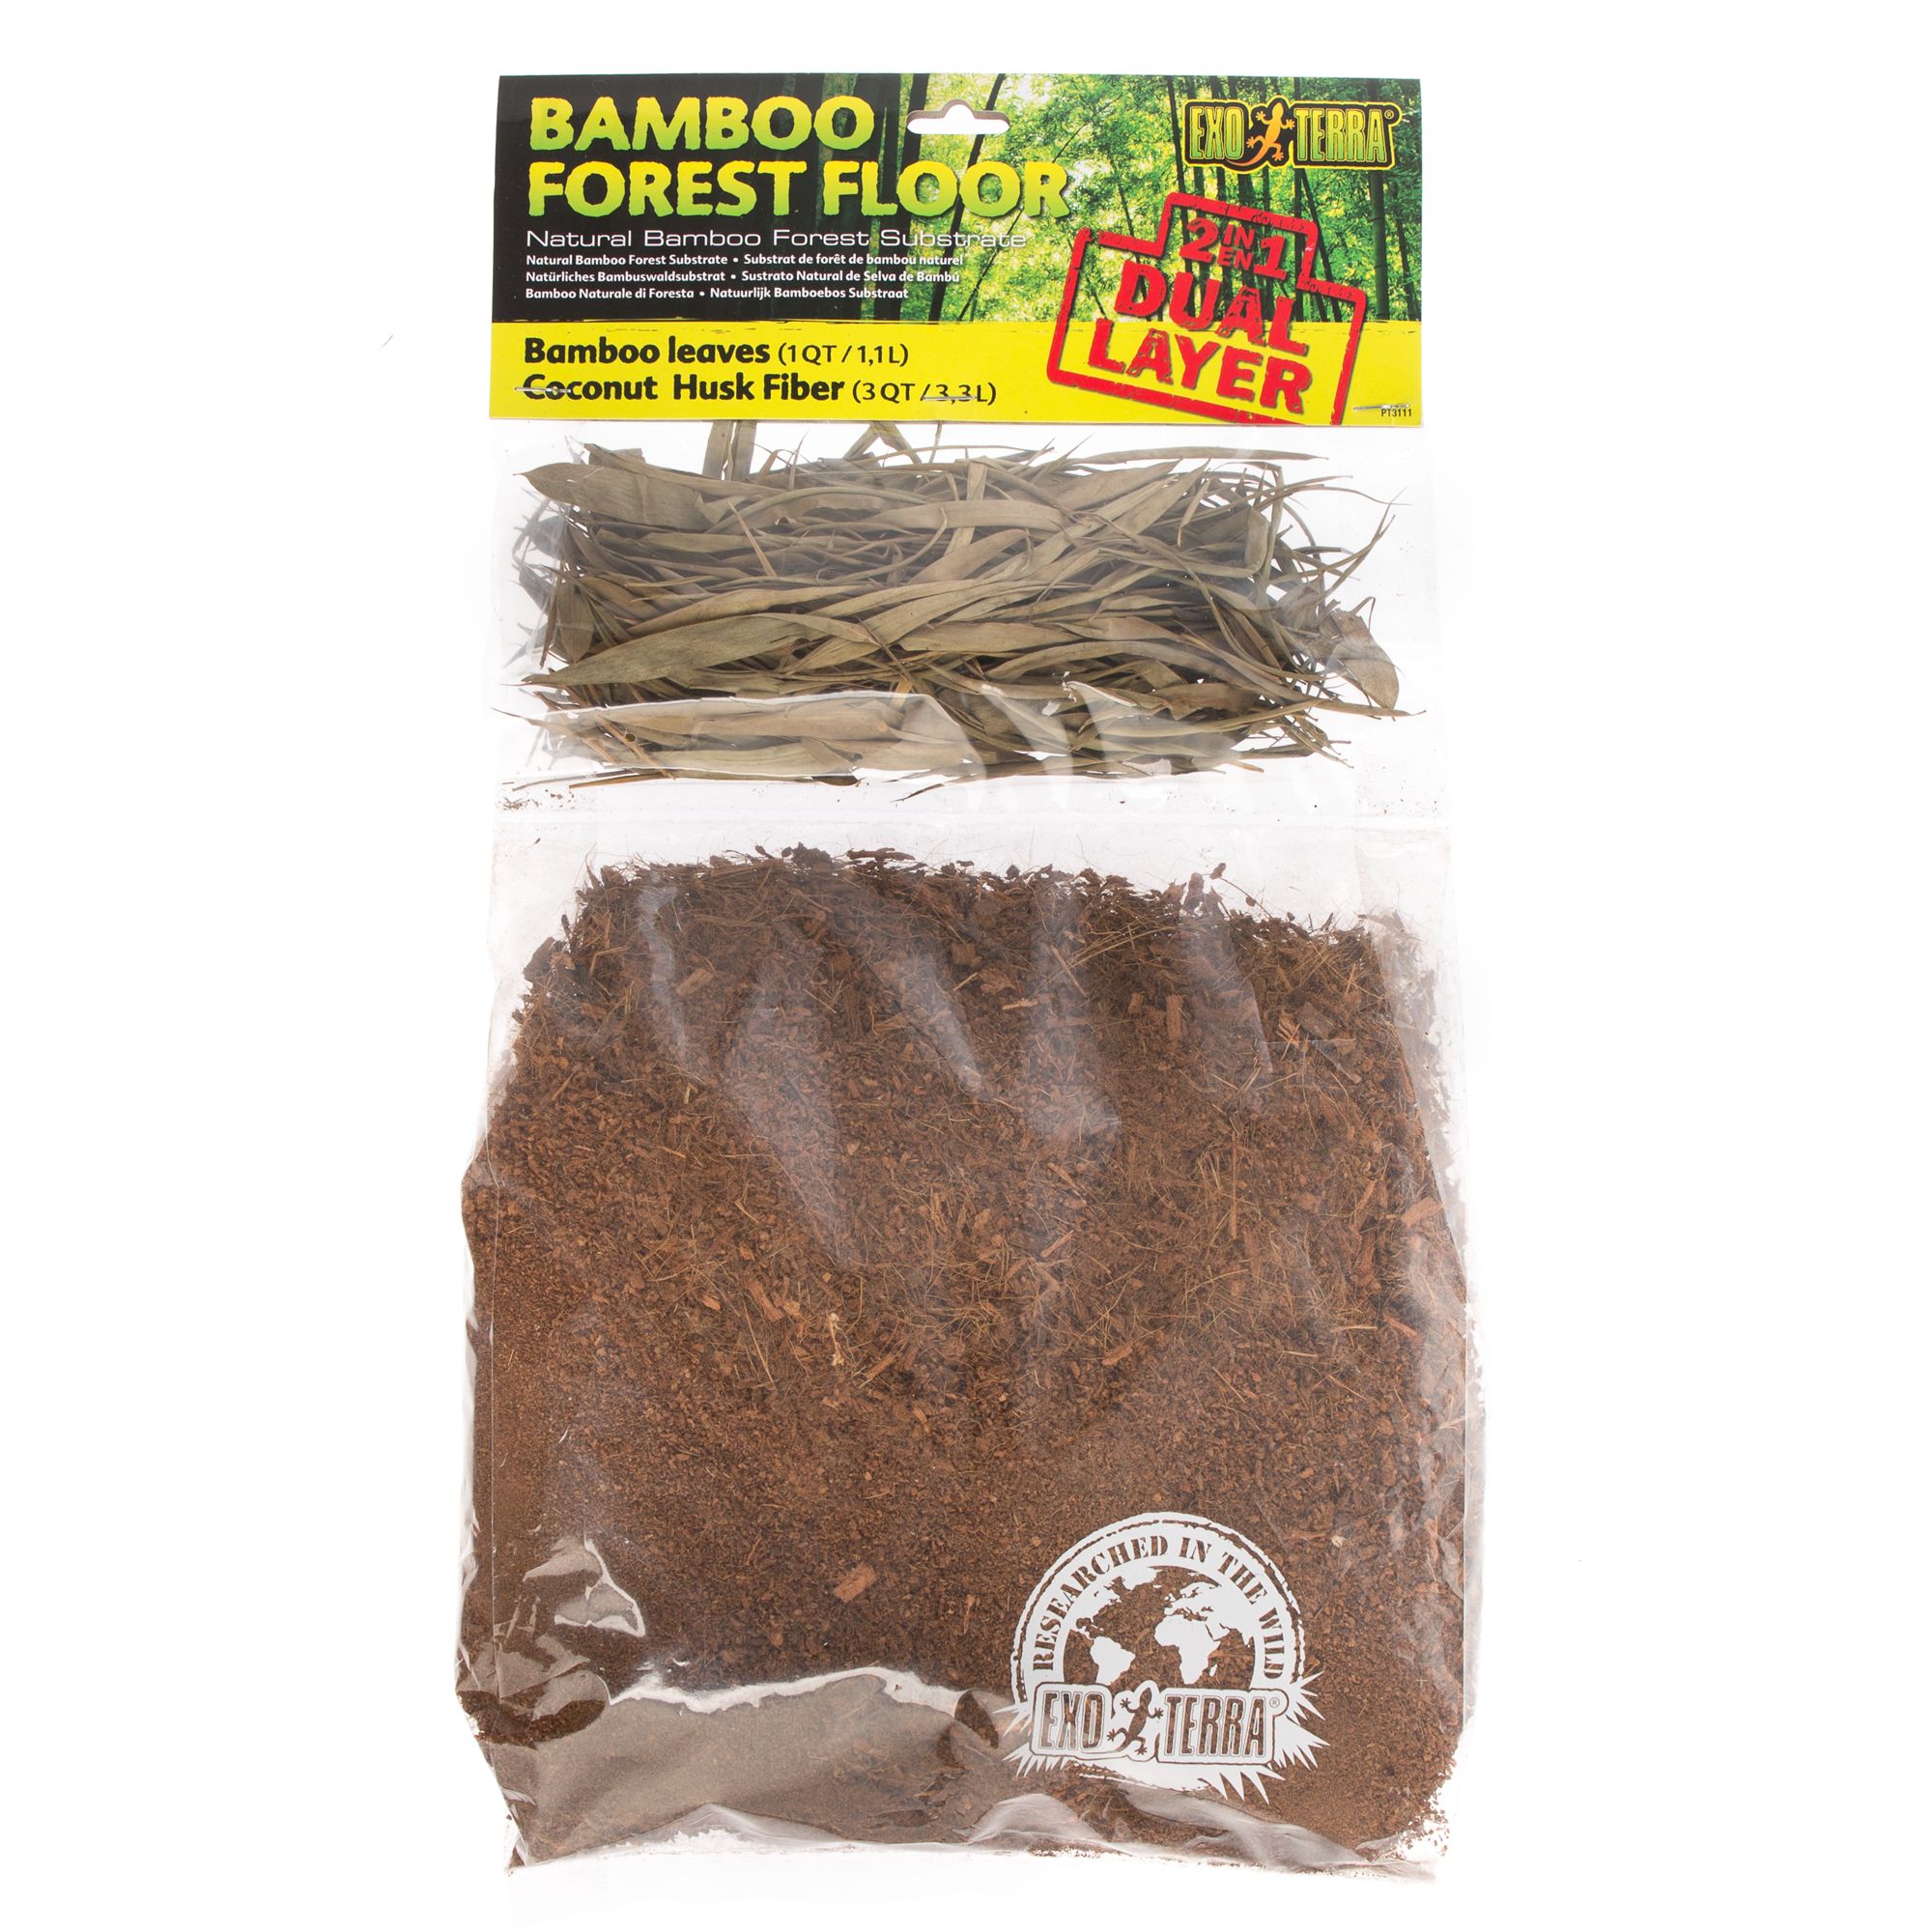 Exo Terra Bamboo Forest Floor Reptile Substrate Bedding